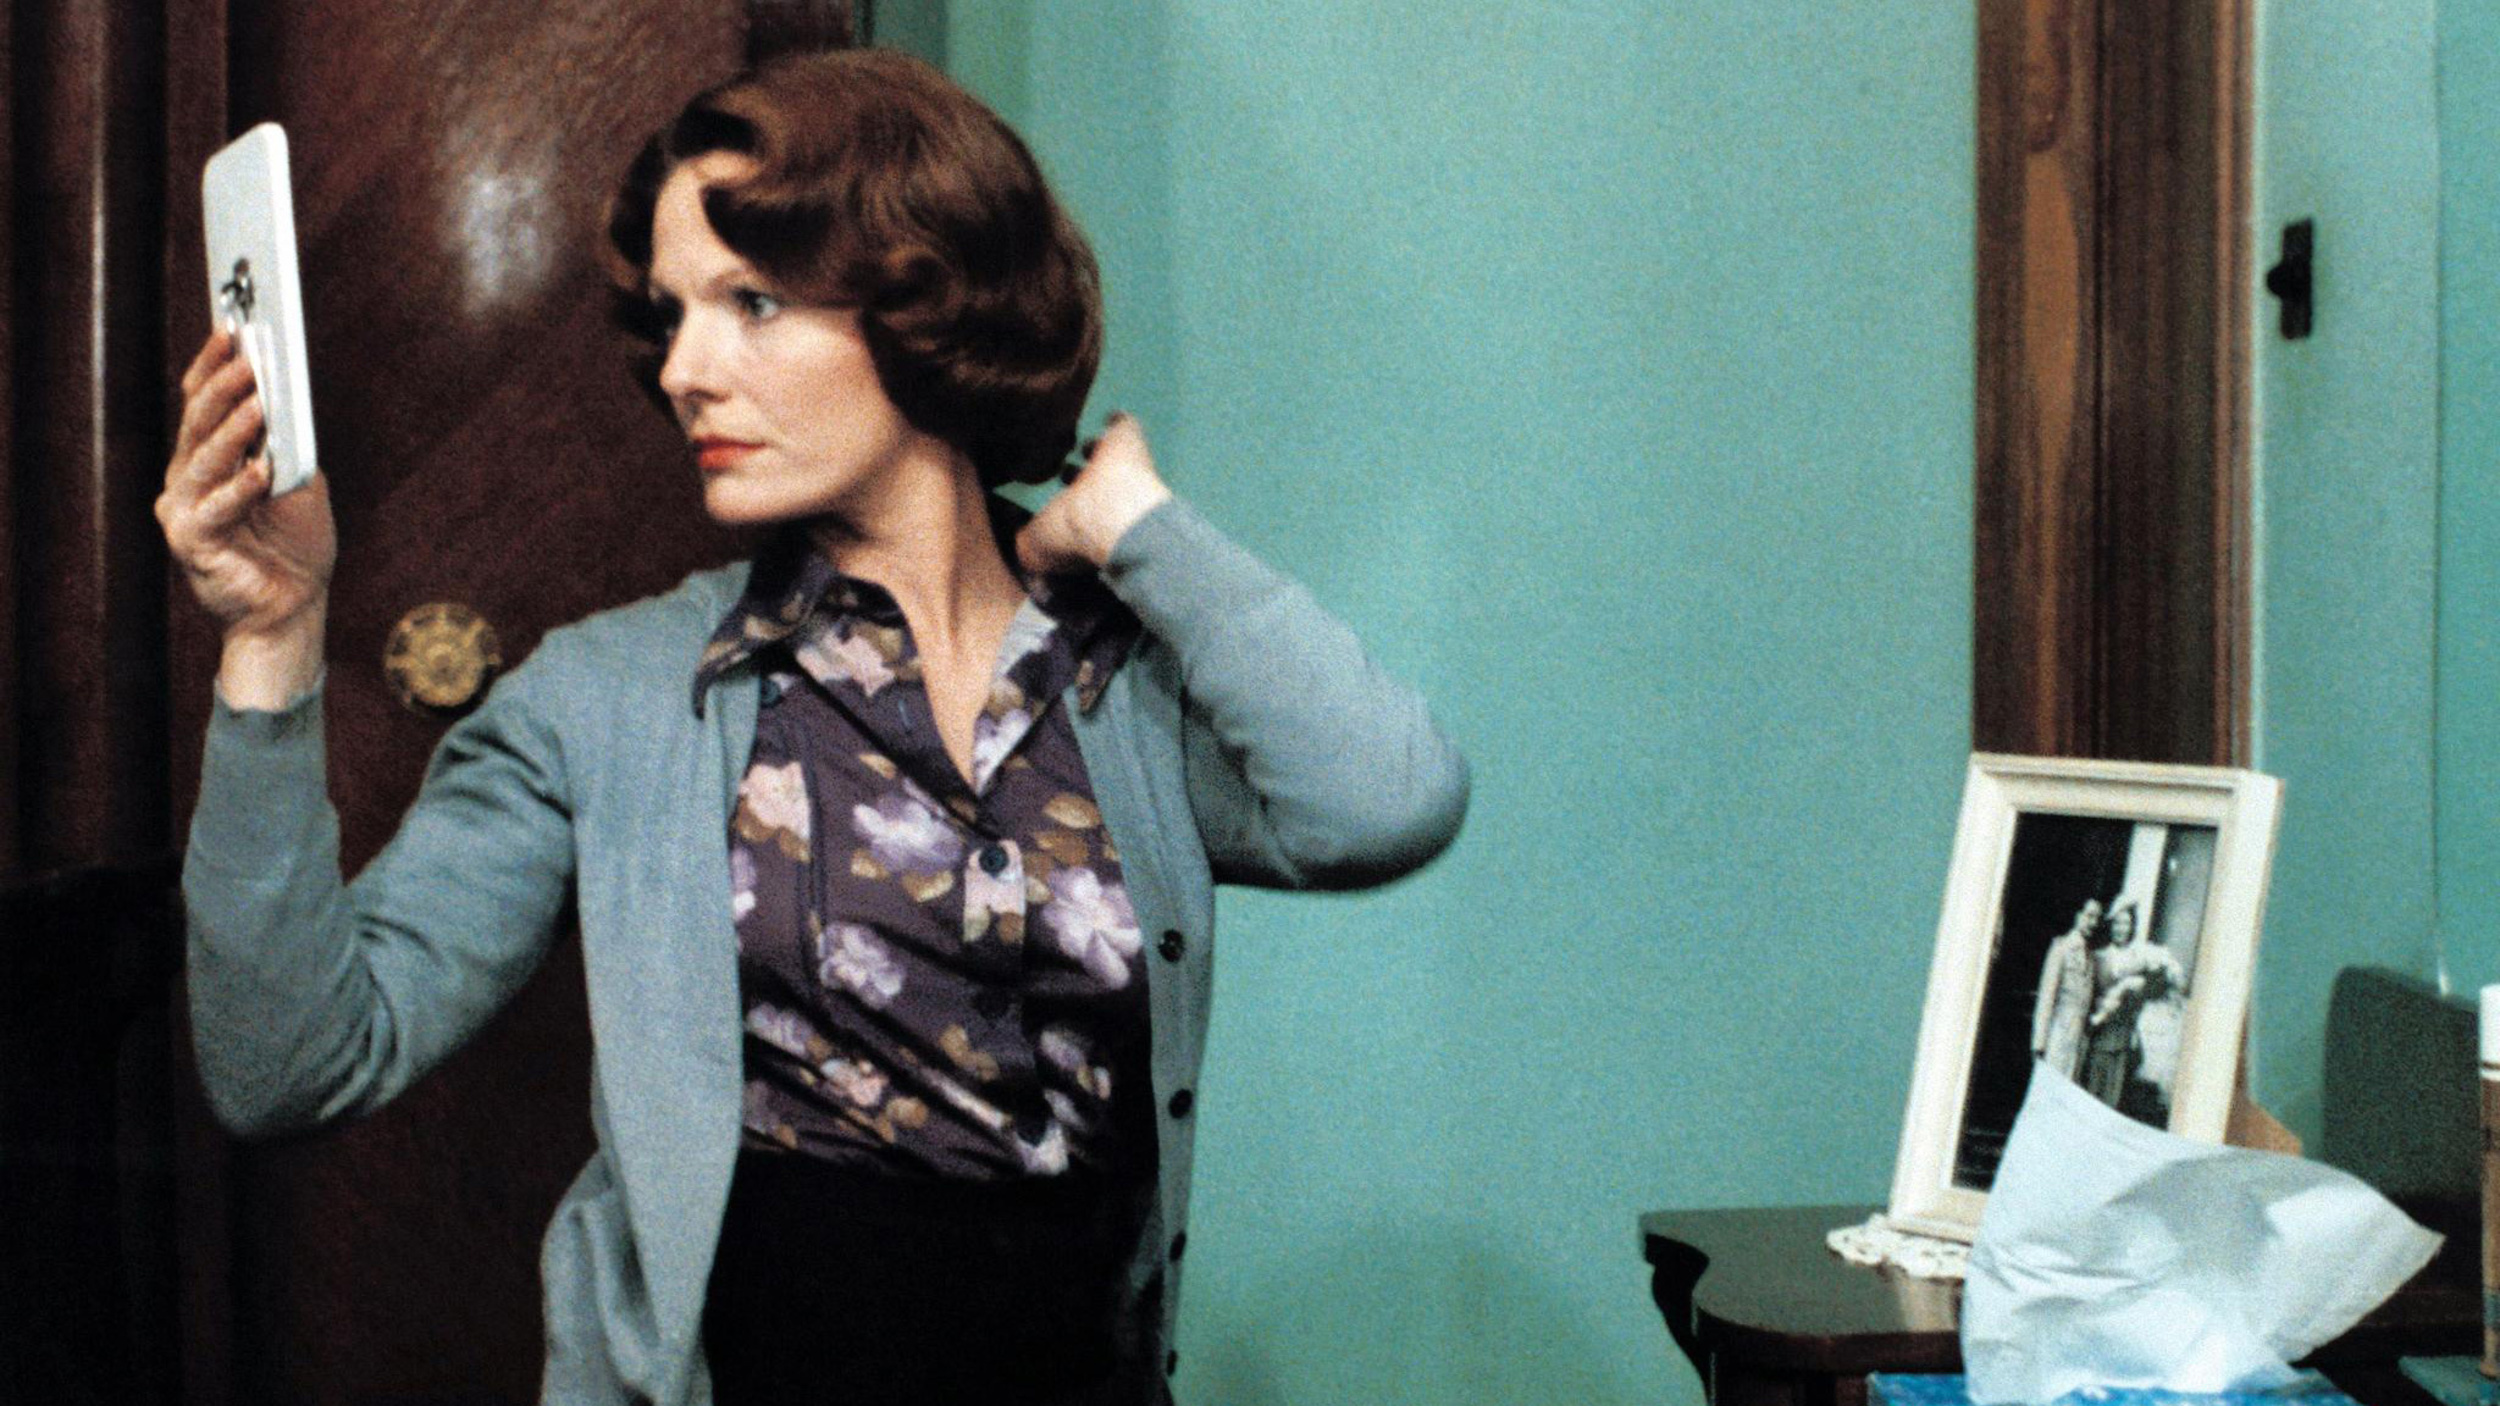 <p>The tedium is the point of Chantal Ackerman’s experiential masterpiece that immerses the viewer in the mundane life of a widowed homemaker (Delphine Seyrig). You may not think you want to watch a 221-minute movie about a woman performing ordinary tasks and chores, but as the film wears on, Ackerman gradually drives home a deep, disquieting truth about the machine-like lives women are often forced to live.</p><p>You may also like: <a href='https://www.yardbarker.com/entertainment/articles/20_facts_you_might_not_know_about_goodfellas_031924/s1__35120234'>20 facts you might not know about 'Goodfellas'</a></p>